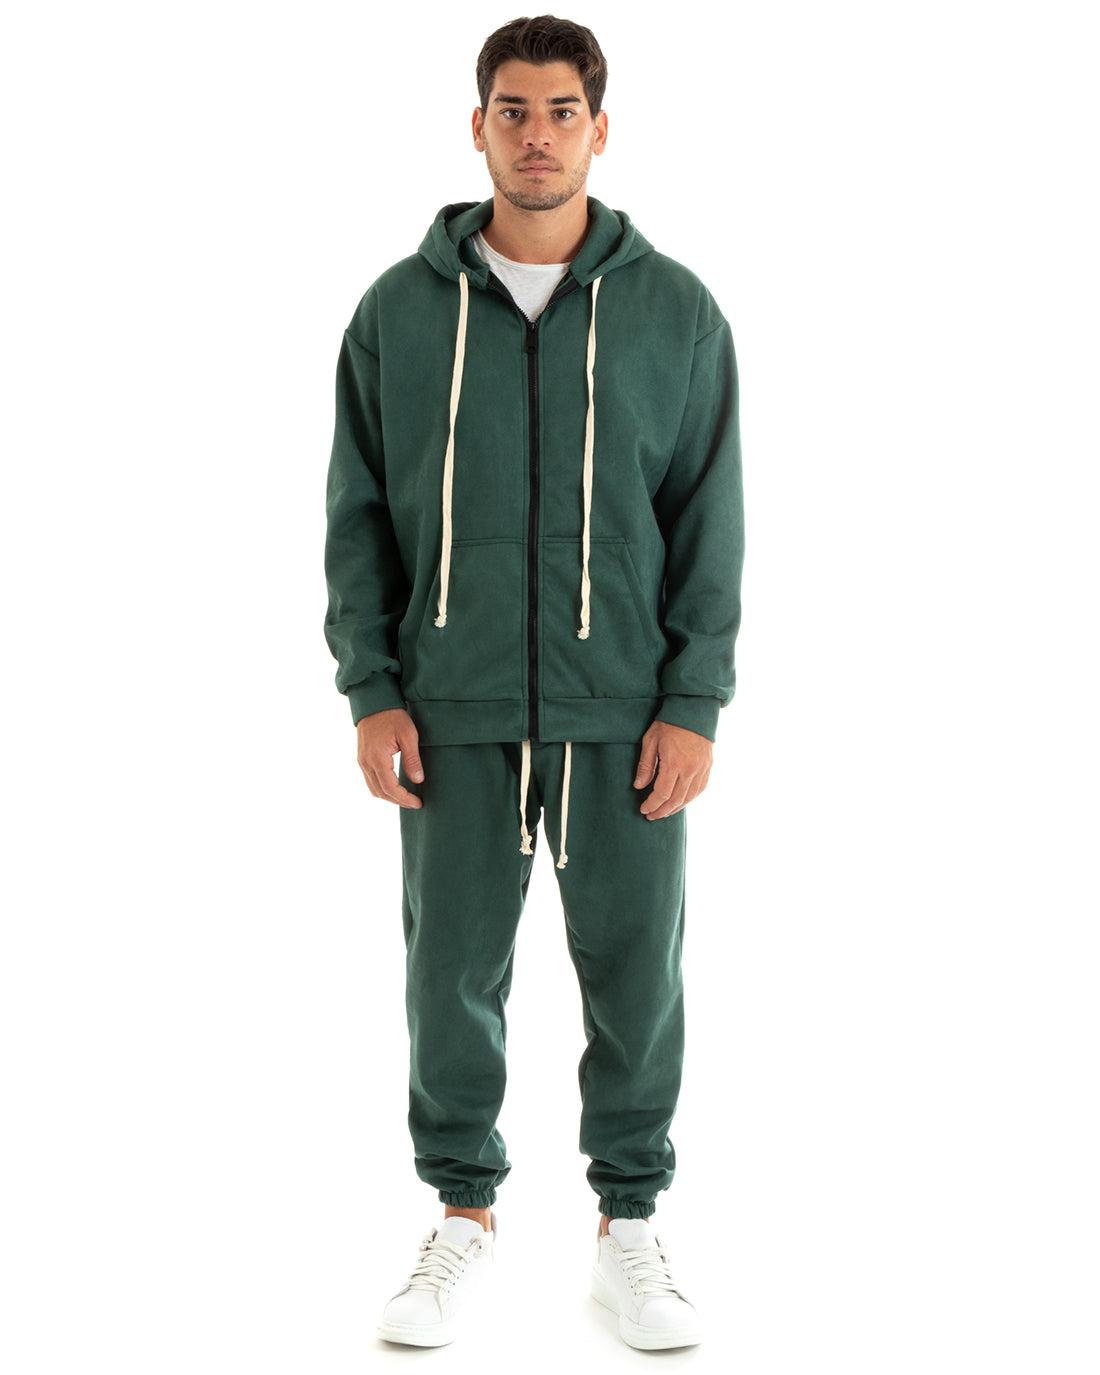 Men's Tracksuit Set with Hood and Zip Trousers with Drawstring Waist in Green Eco Suede GIOSAL-OU2397A